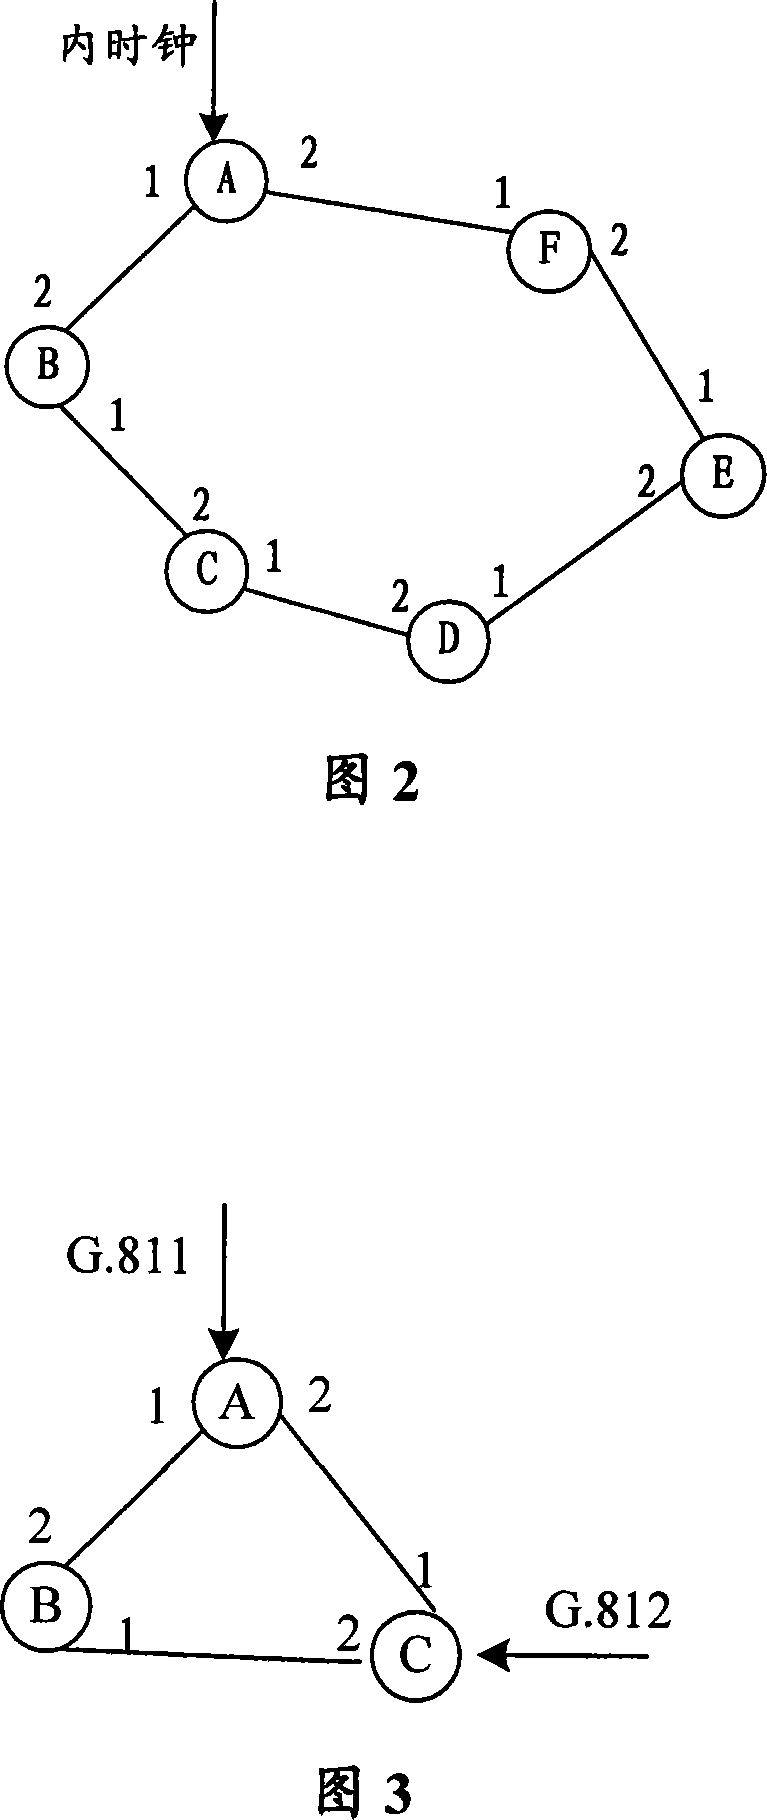 Clock chain circuit automatic protection method in packet transmission network